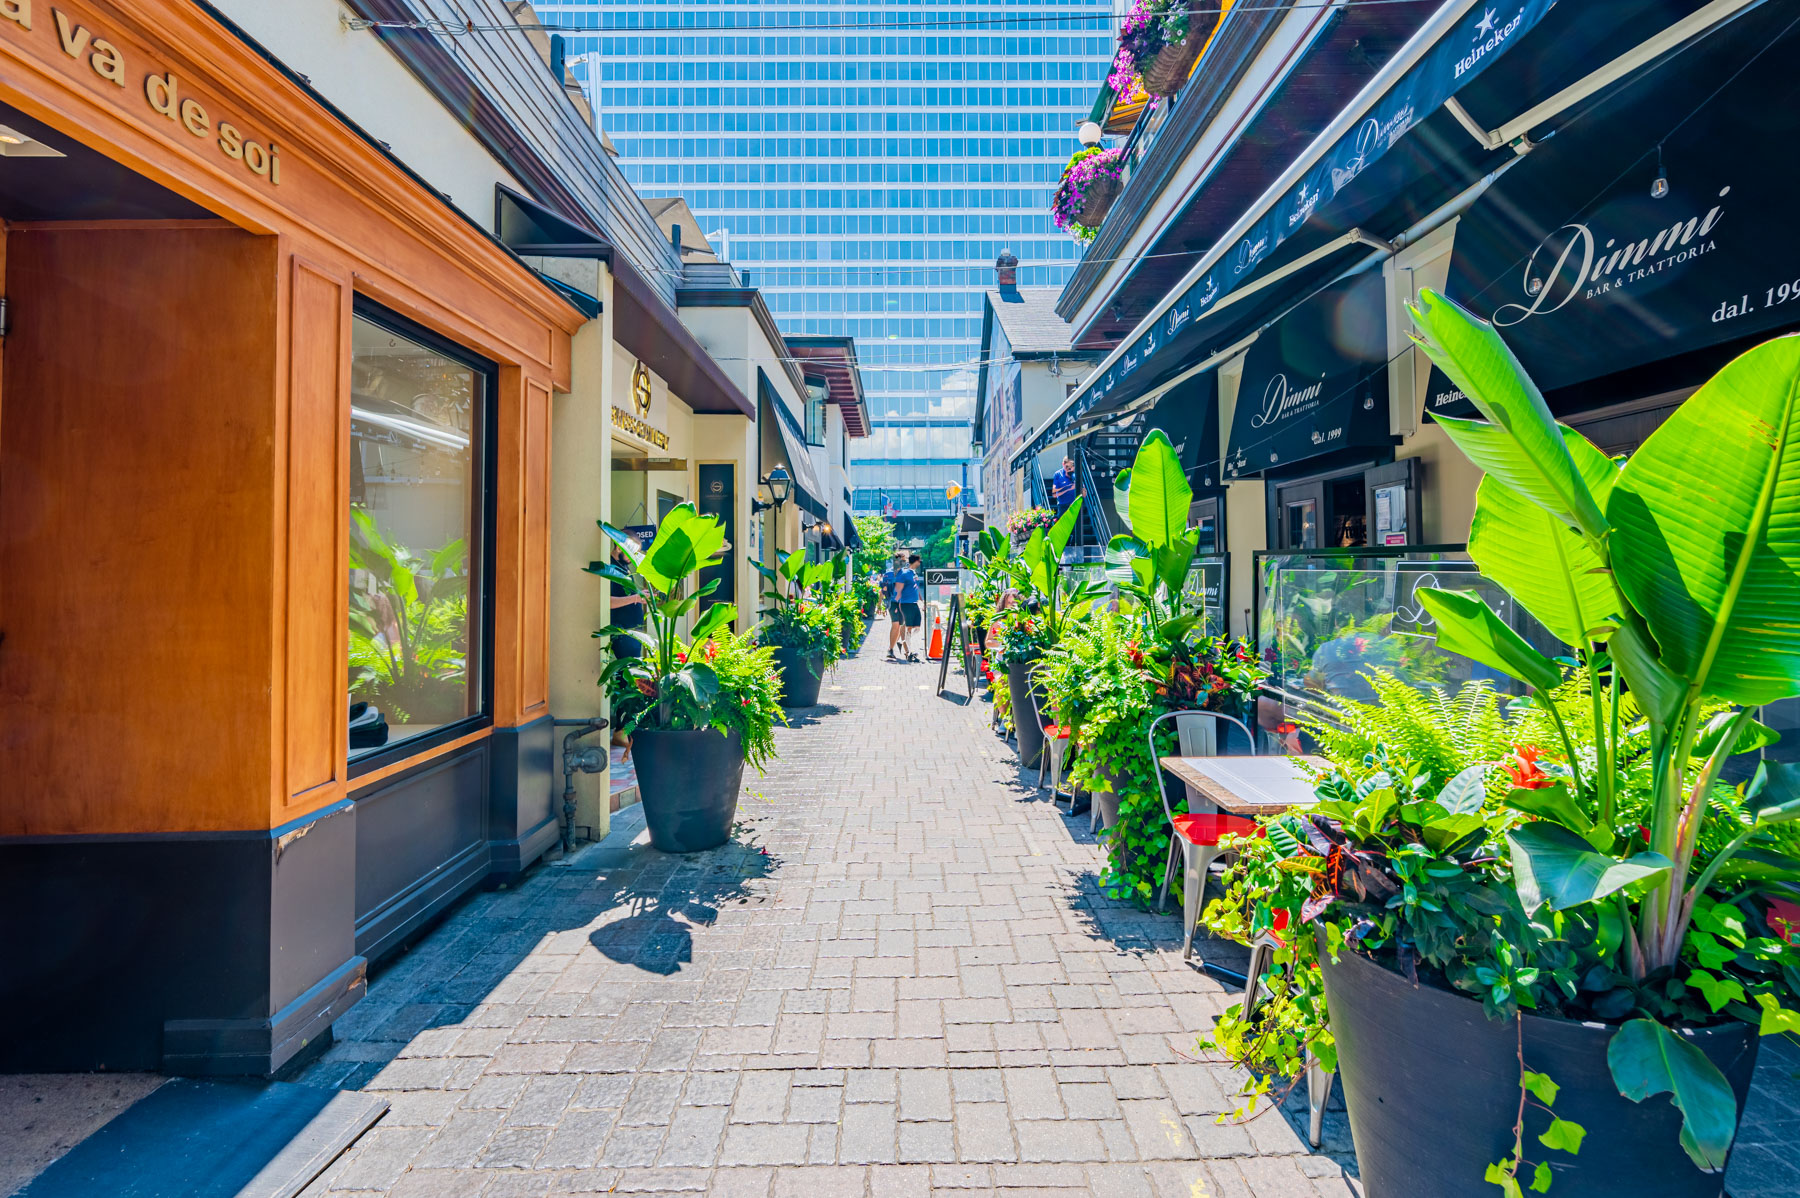 Narrow lane with potted plants and Dimmi Bar & Trattoria restaurant, Yorkville Toronto.